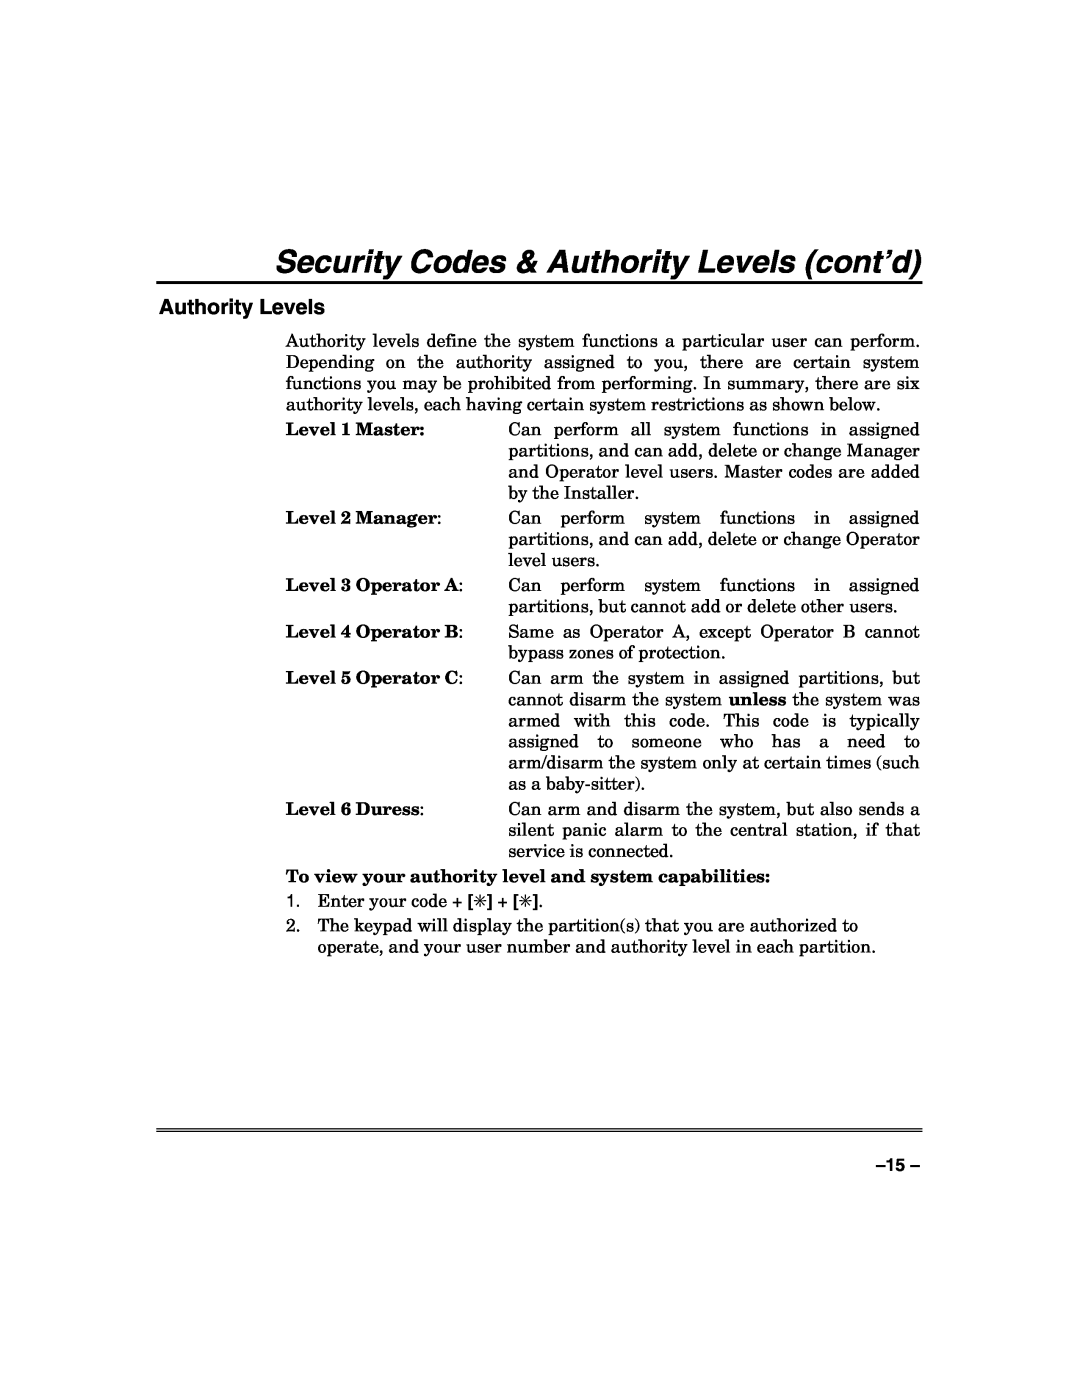 Honeywell VISTA-50P manual Security Codes & Authority Levels cont’d, Level 1 Master, Level 2 Manager, Level 3 Operator A 